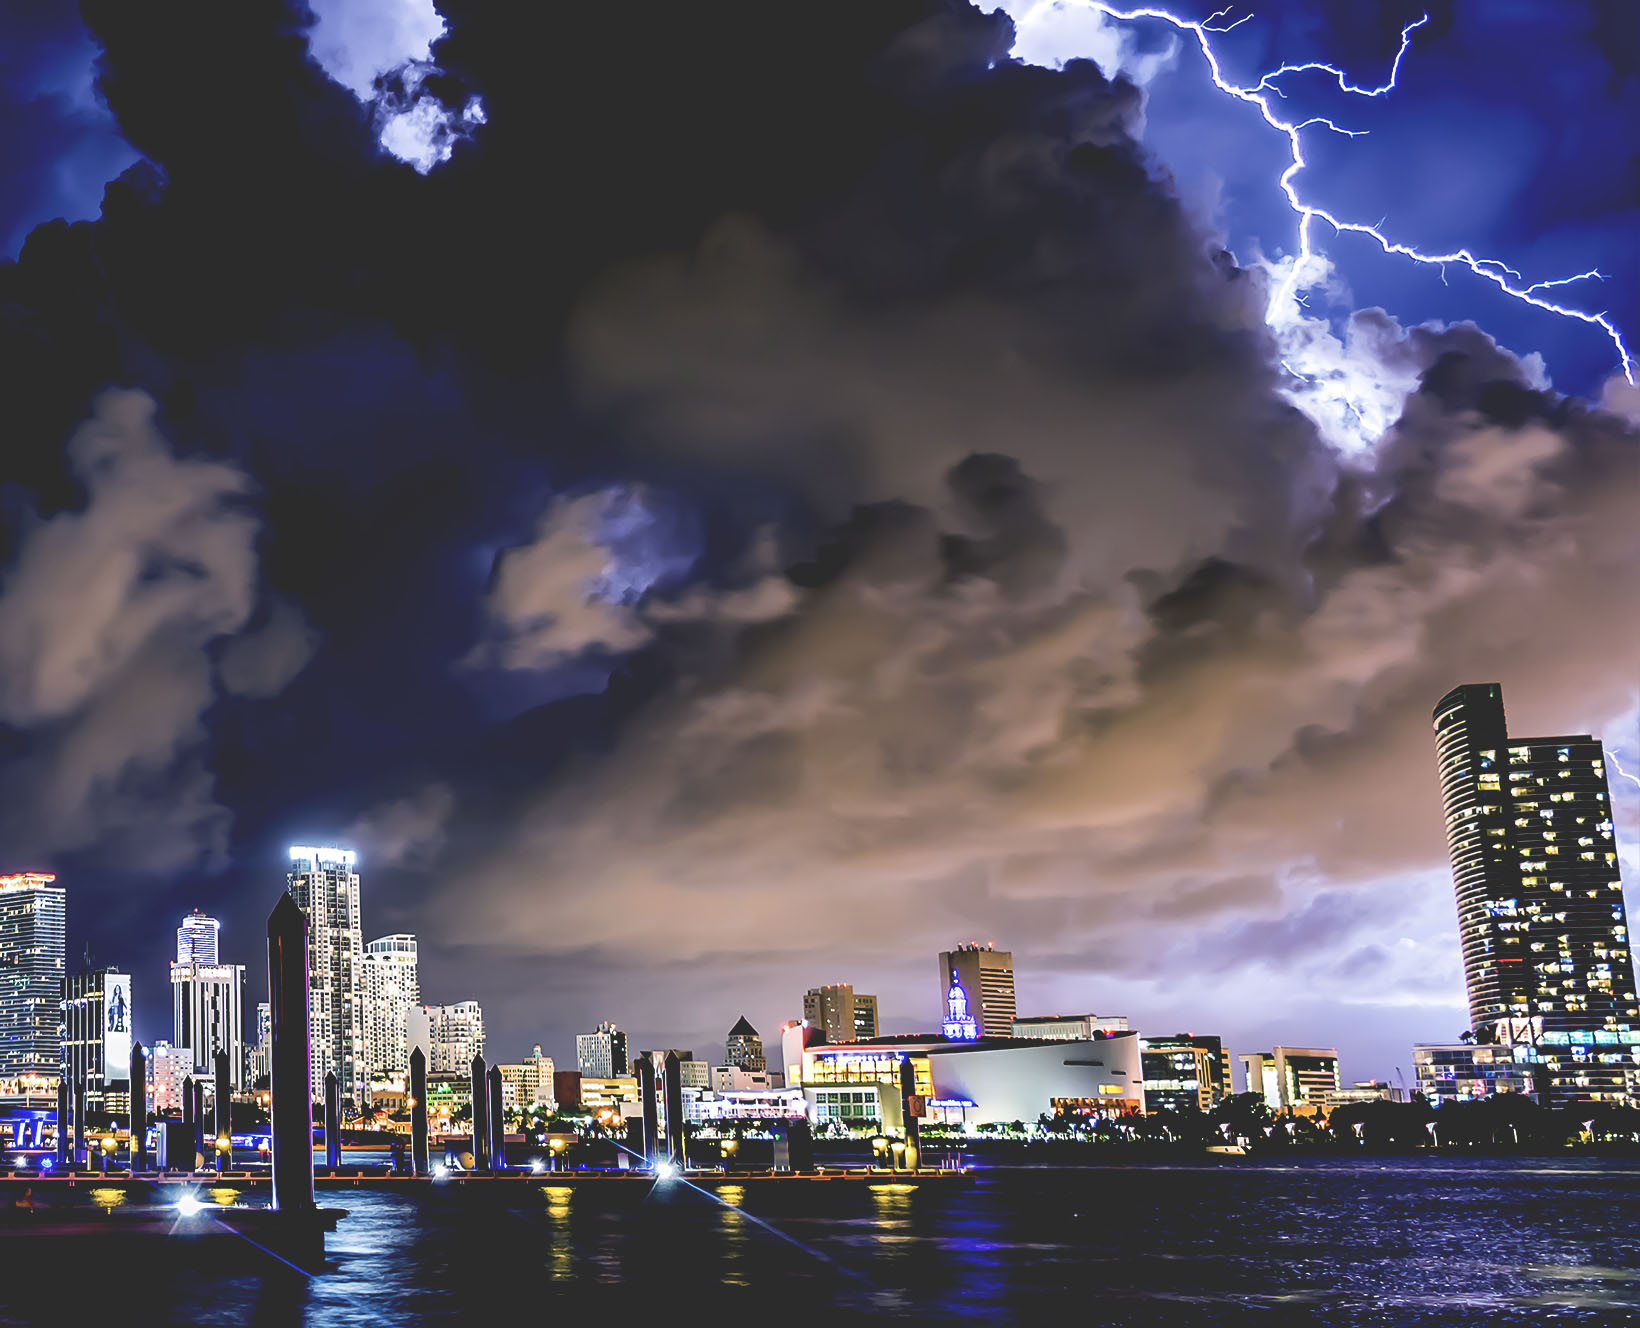 Lightning striking in Miami during a storm